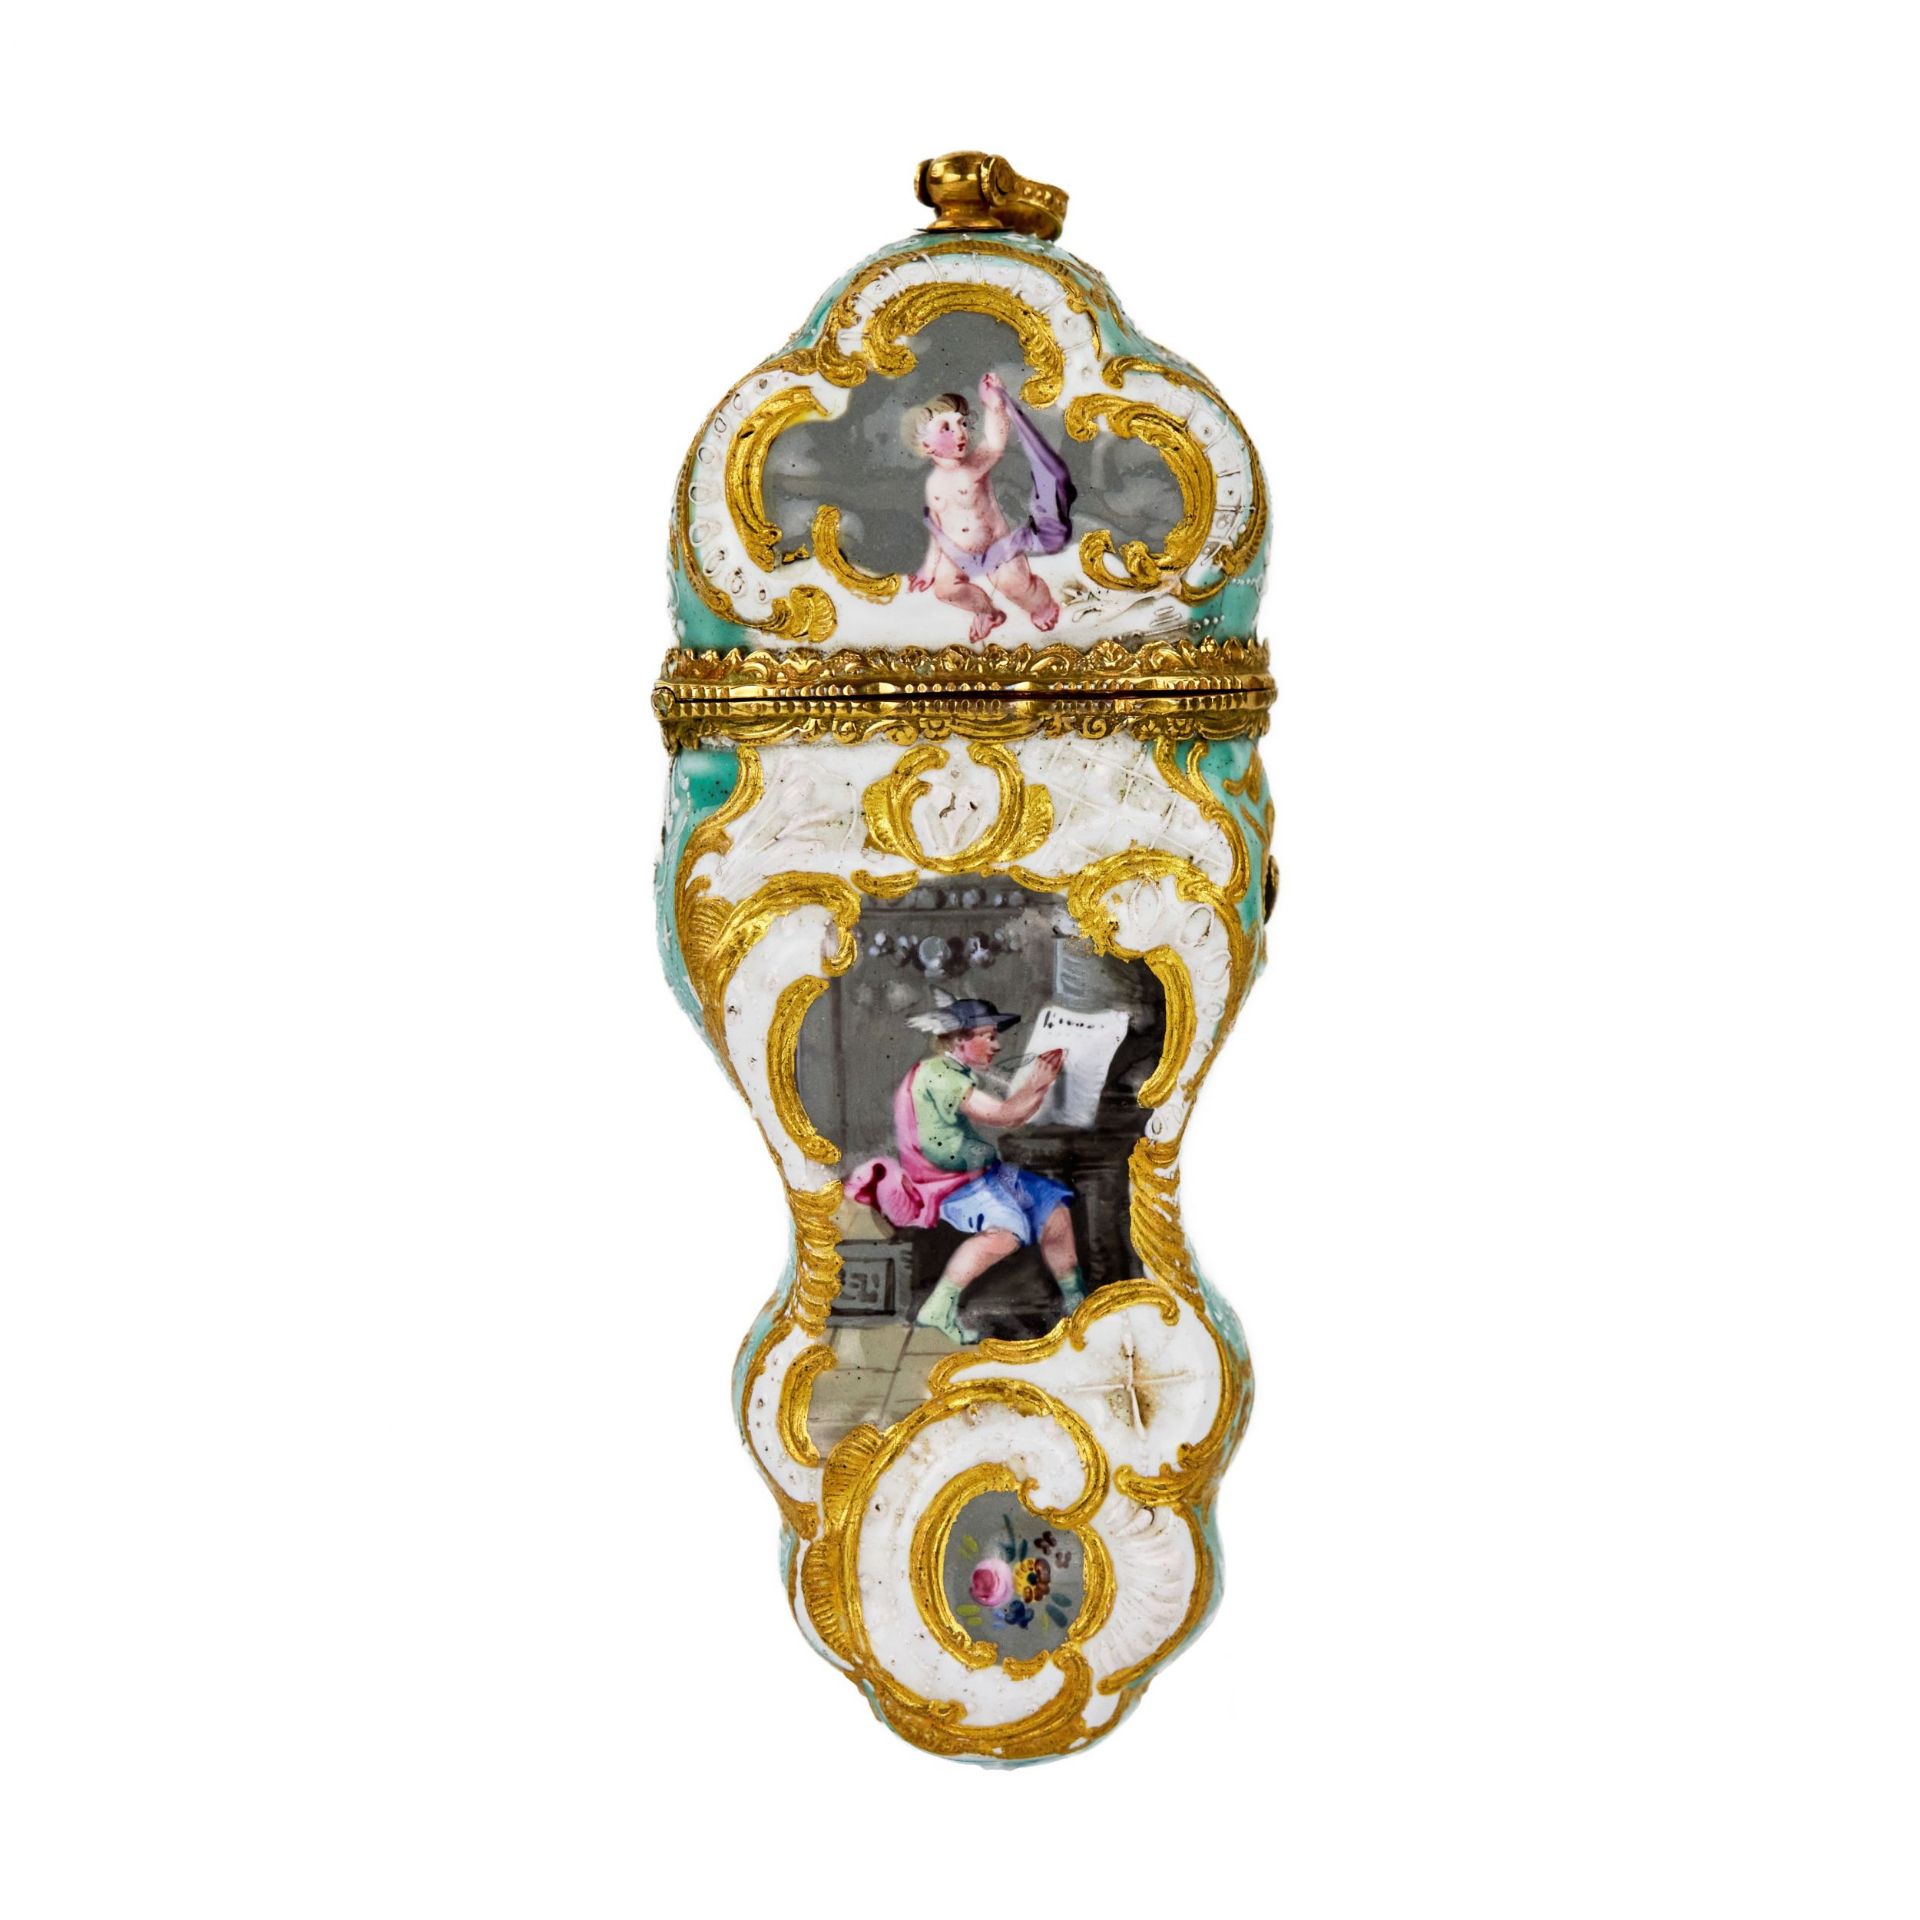 English painted porcelain necessaire with gold. 18 century. - Image 4 of 10